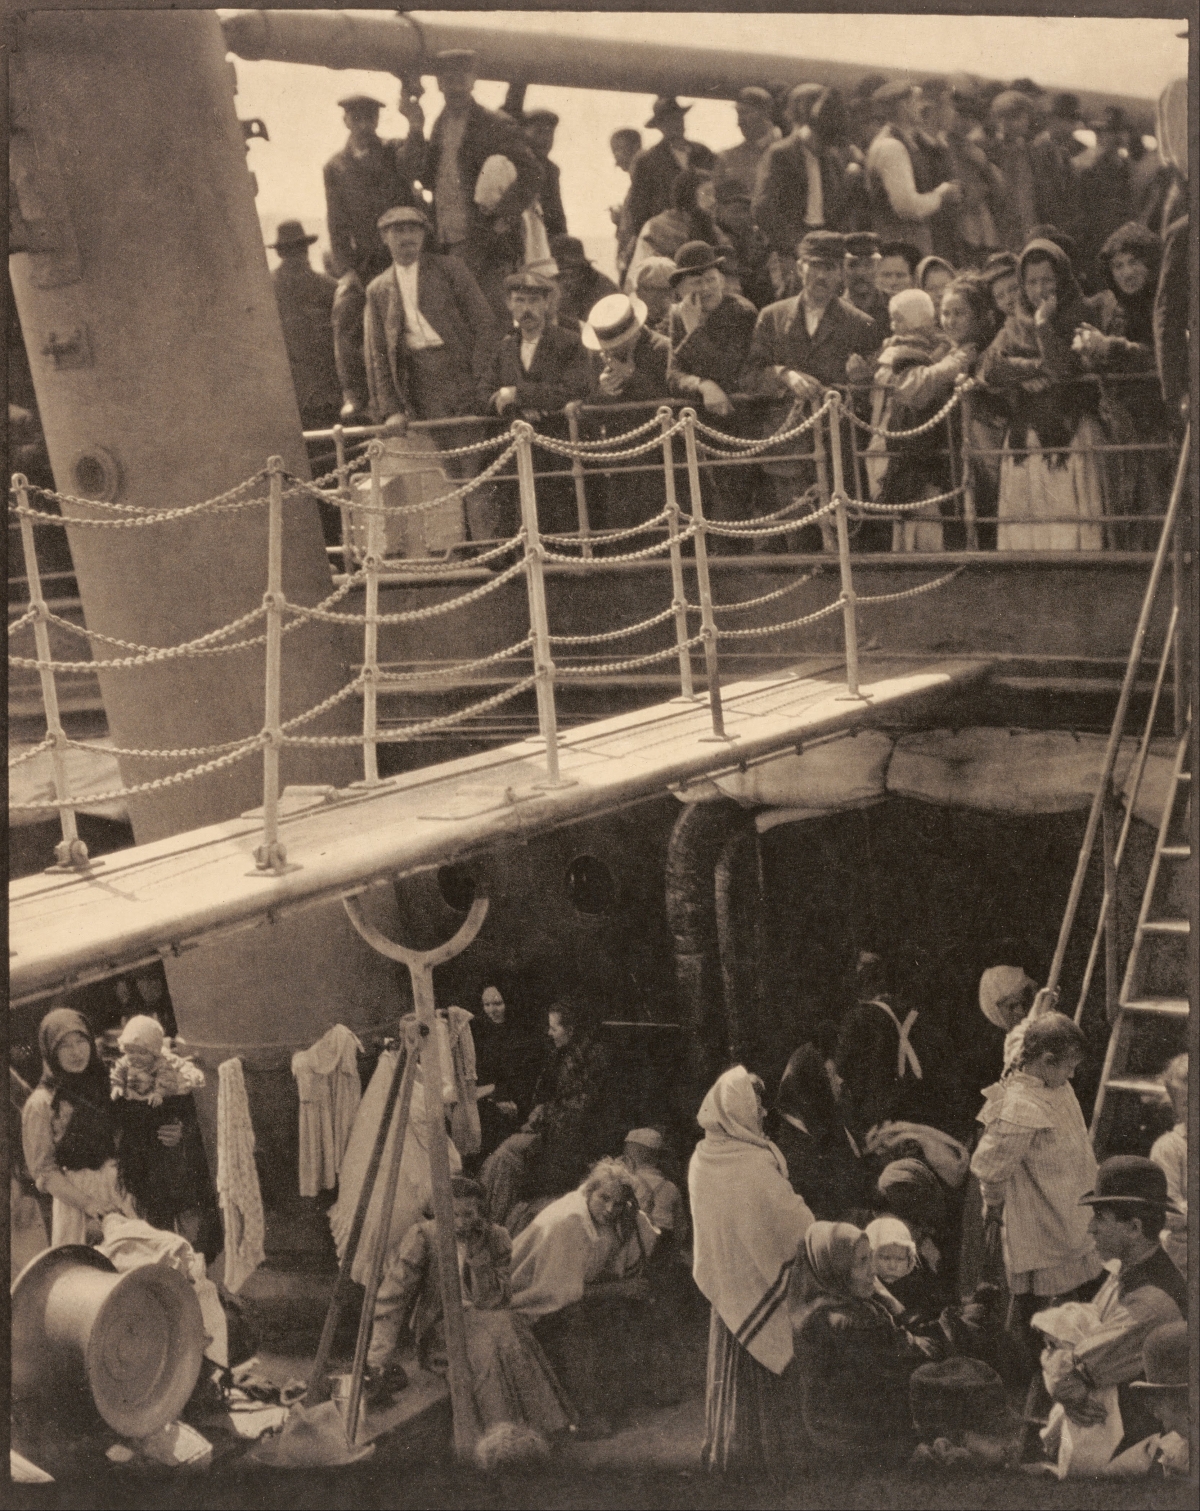 Alfred Stieglitz's famous photograph "The Steerage" was taken in 1907.